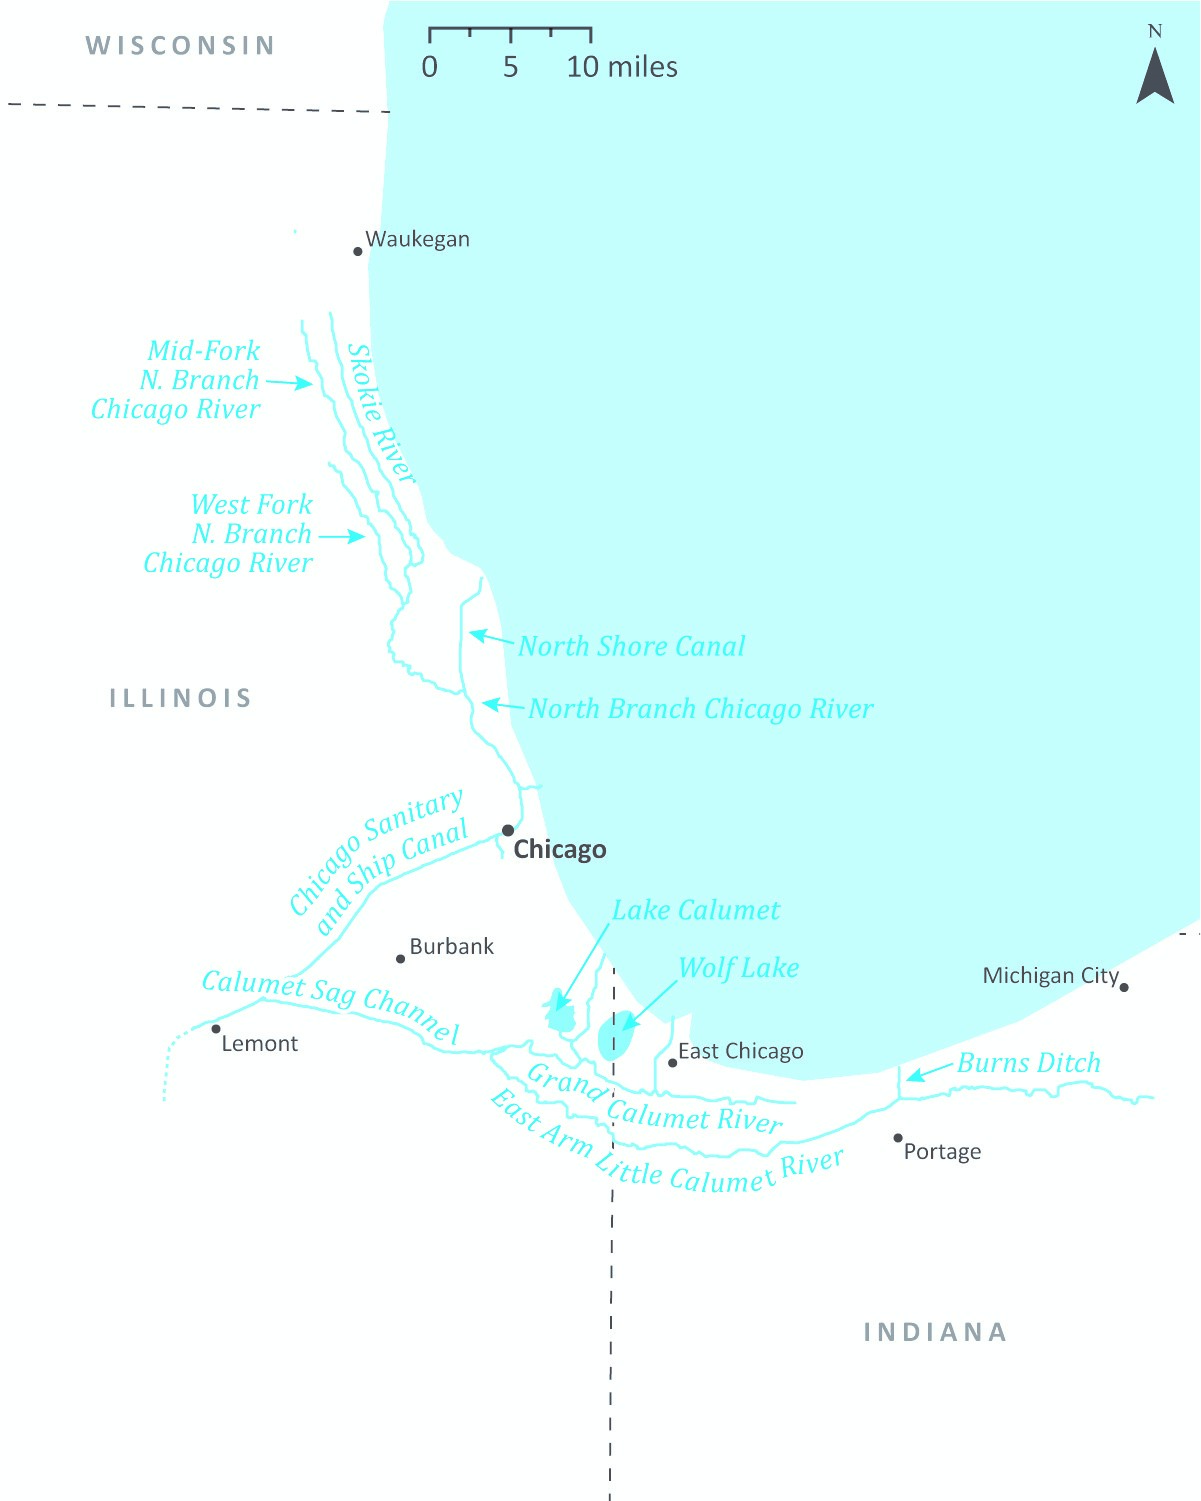 Map of Rivers surrounding Chicago that connect to Lake Michigan.